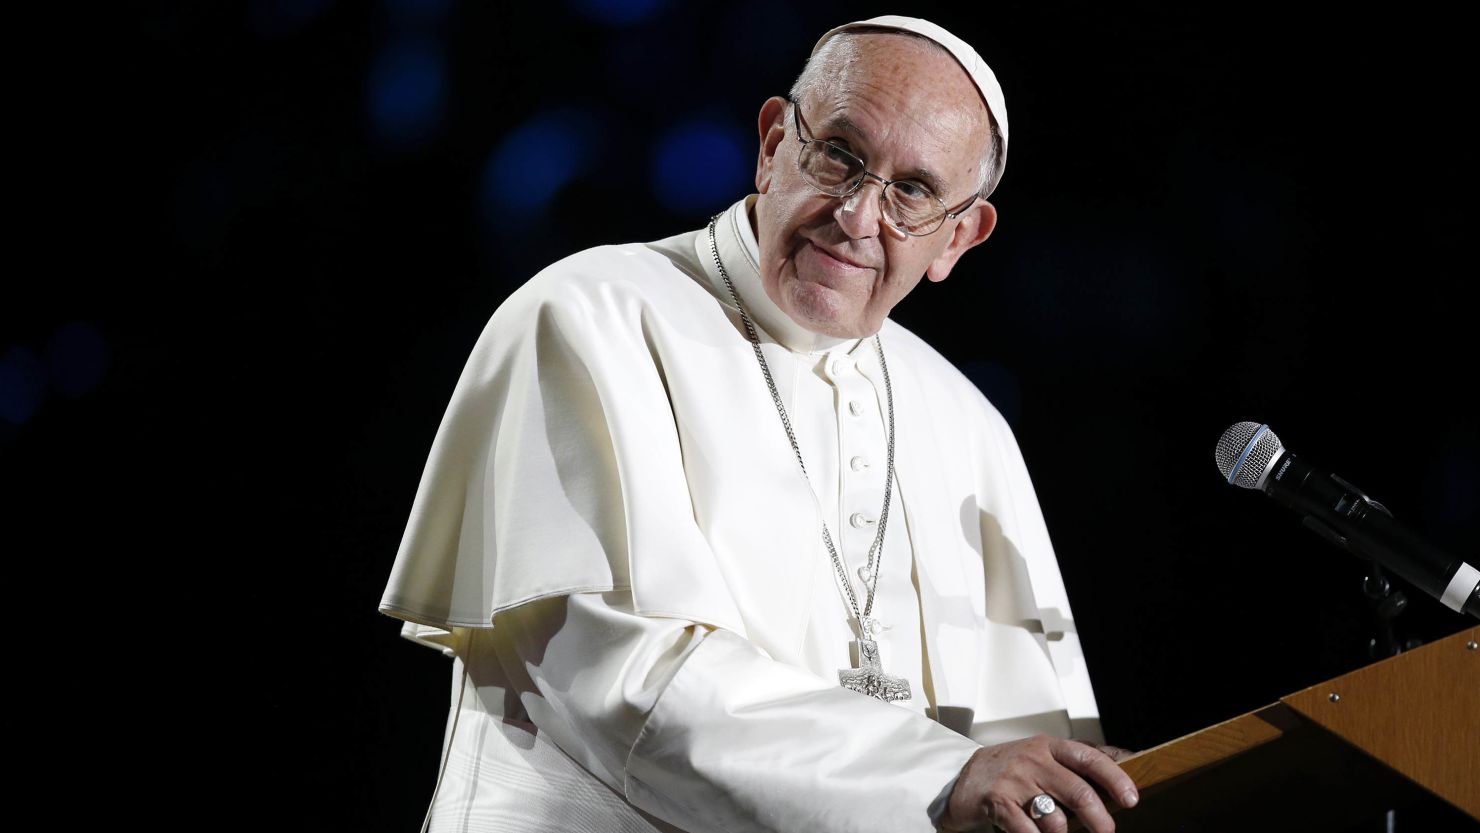 Pope Francis has said previously he would be open to studying the question.